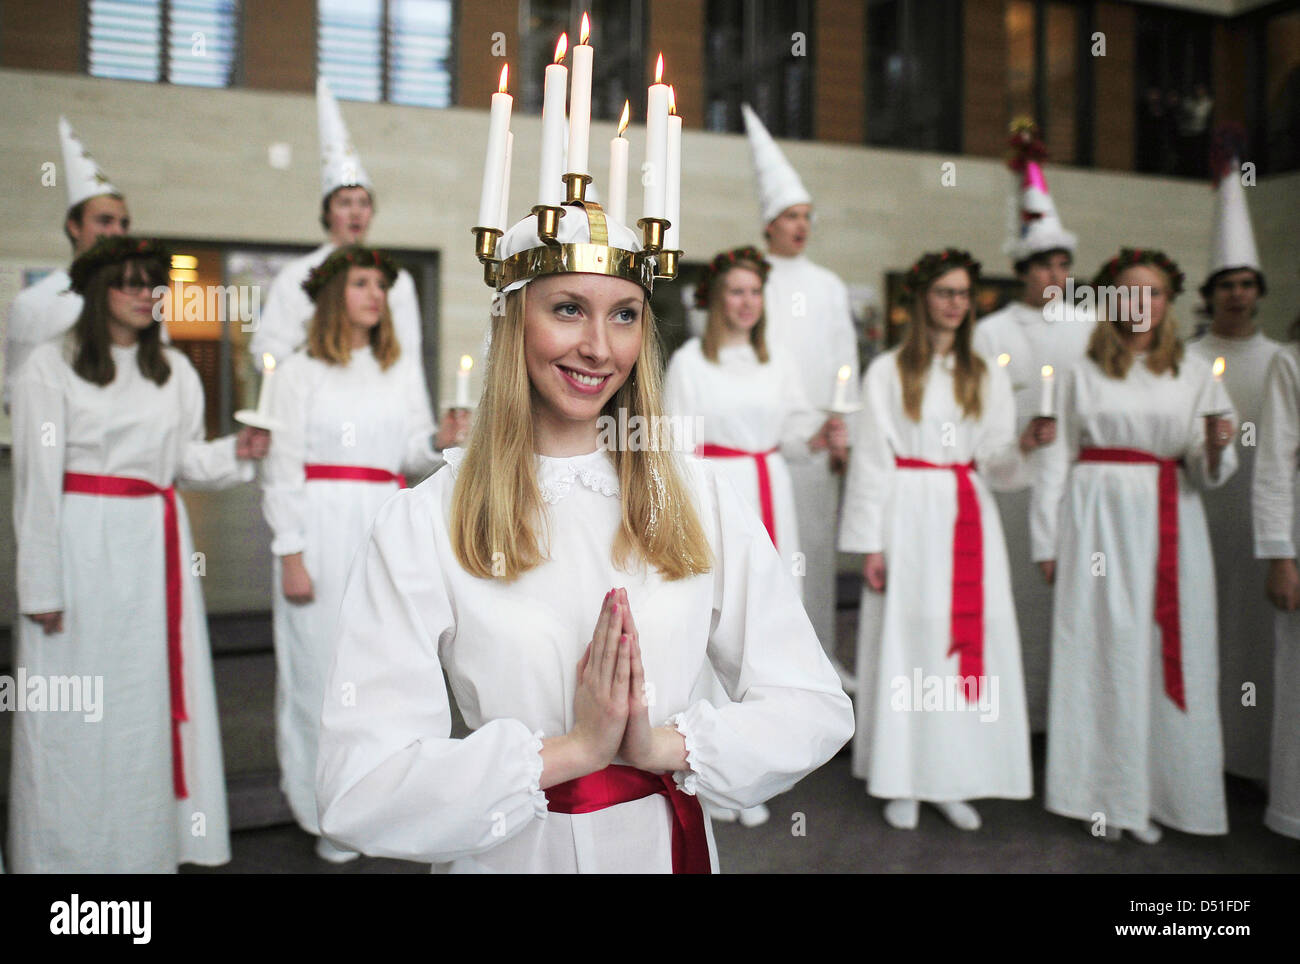 St Lucy and her entourage sing in the Foreign Office on initiative of Swedish Embassy to Germany in Berlin, Germany, 10 December 2010. Saint Lucy's Day is celebrated on 13 December in Sweden and commemorates the Syracuse patron who died in 303 AD. Photo: HANNIBAL Stock Photo